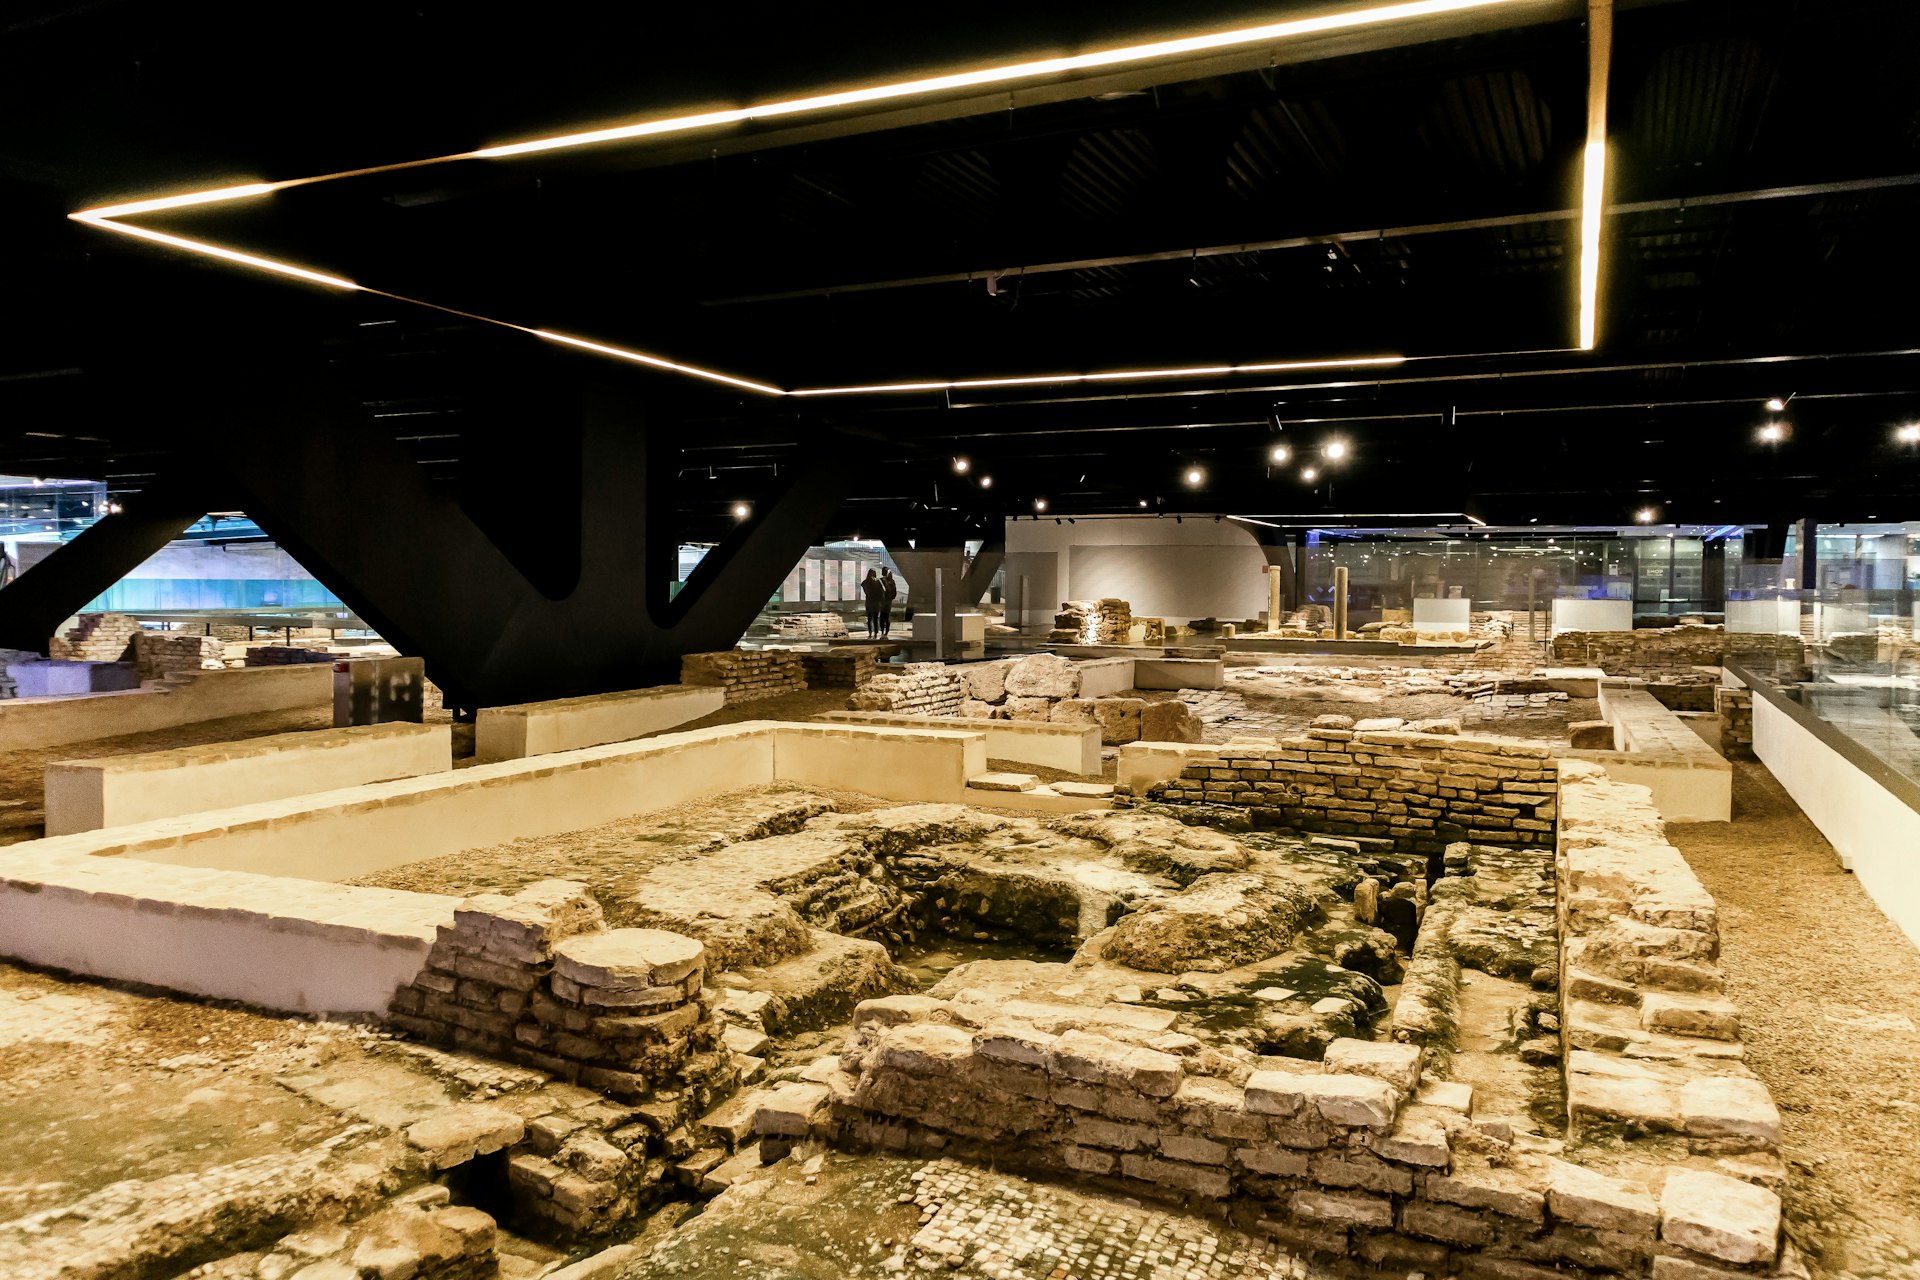 An archaeological museum with ruins lining the ground and visitors looking on from walkways